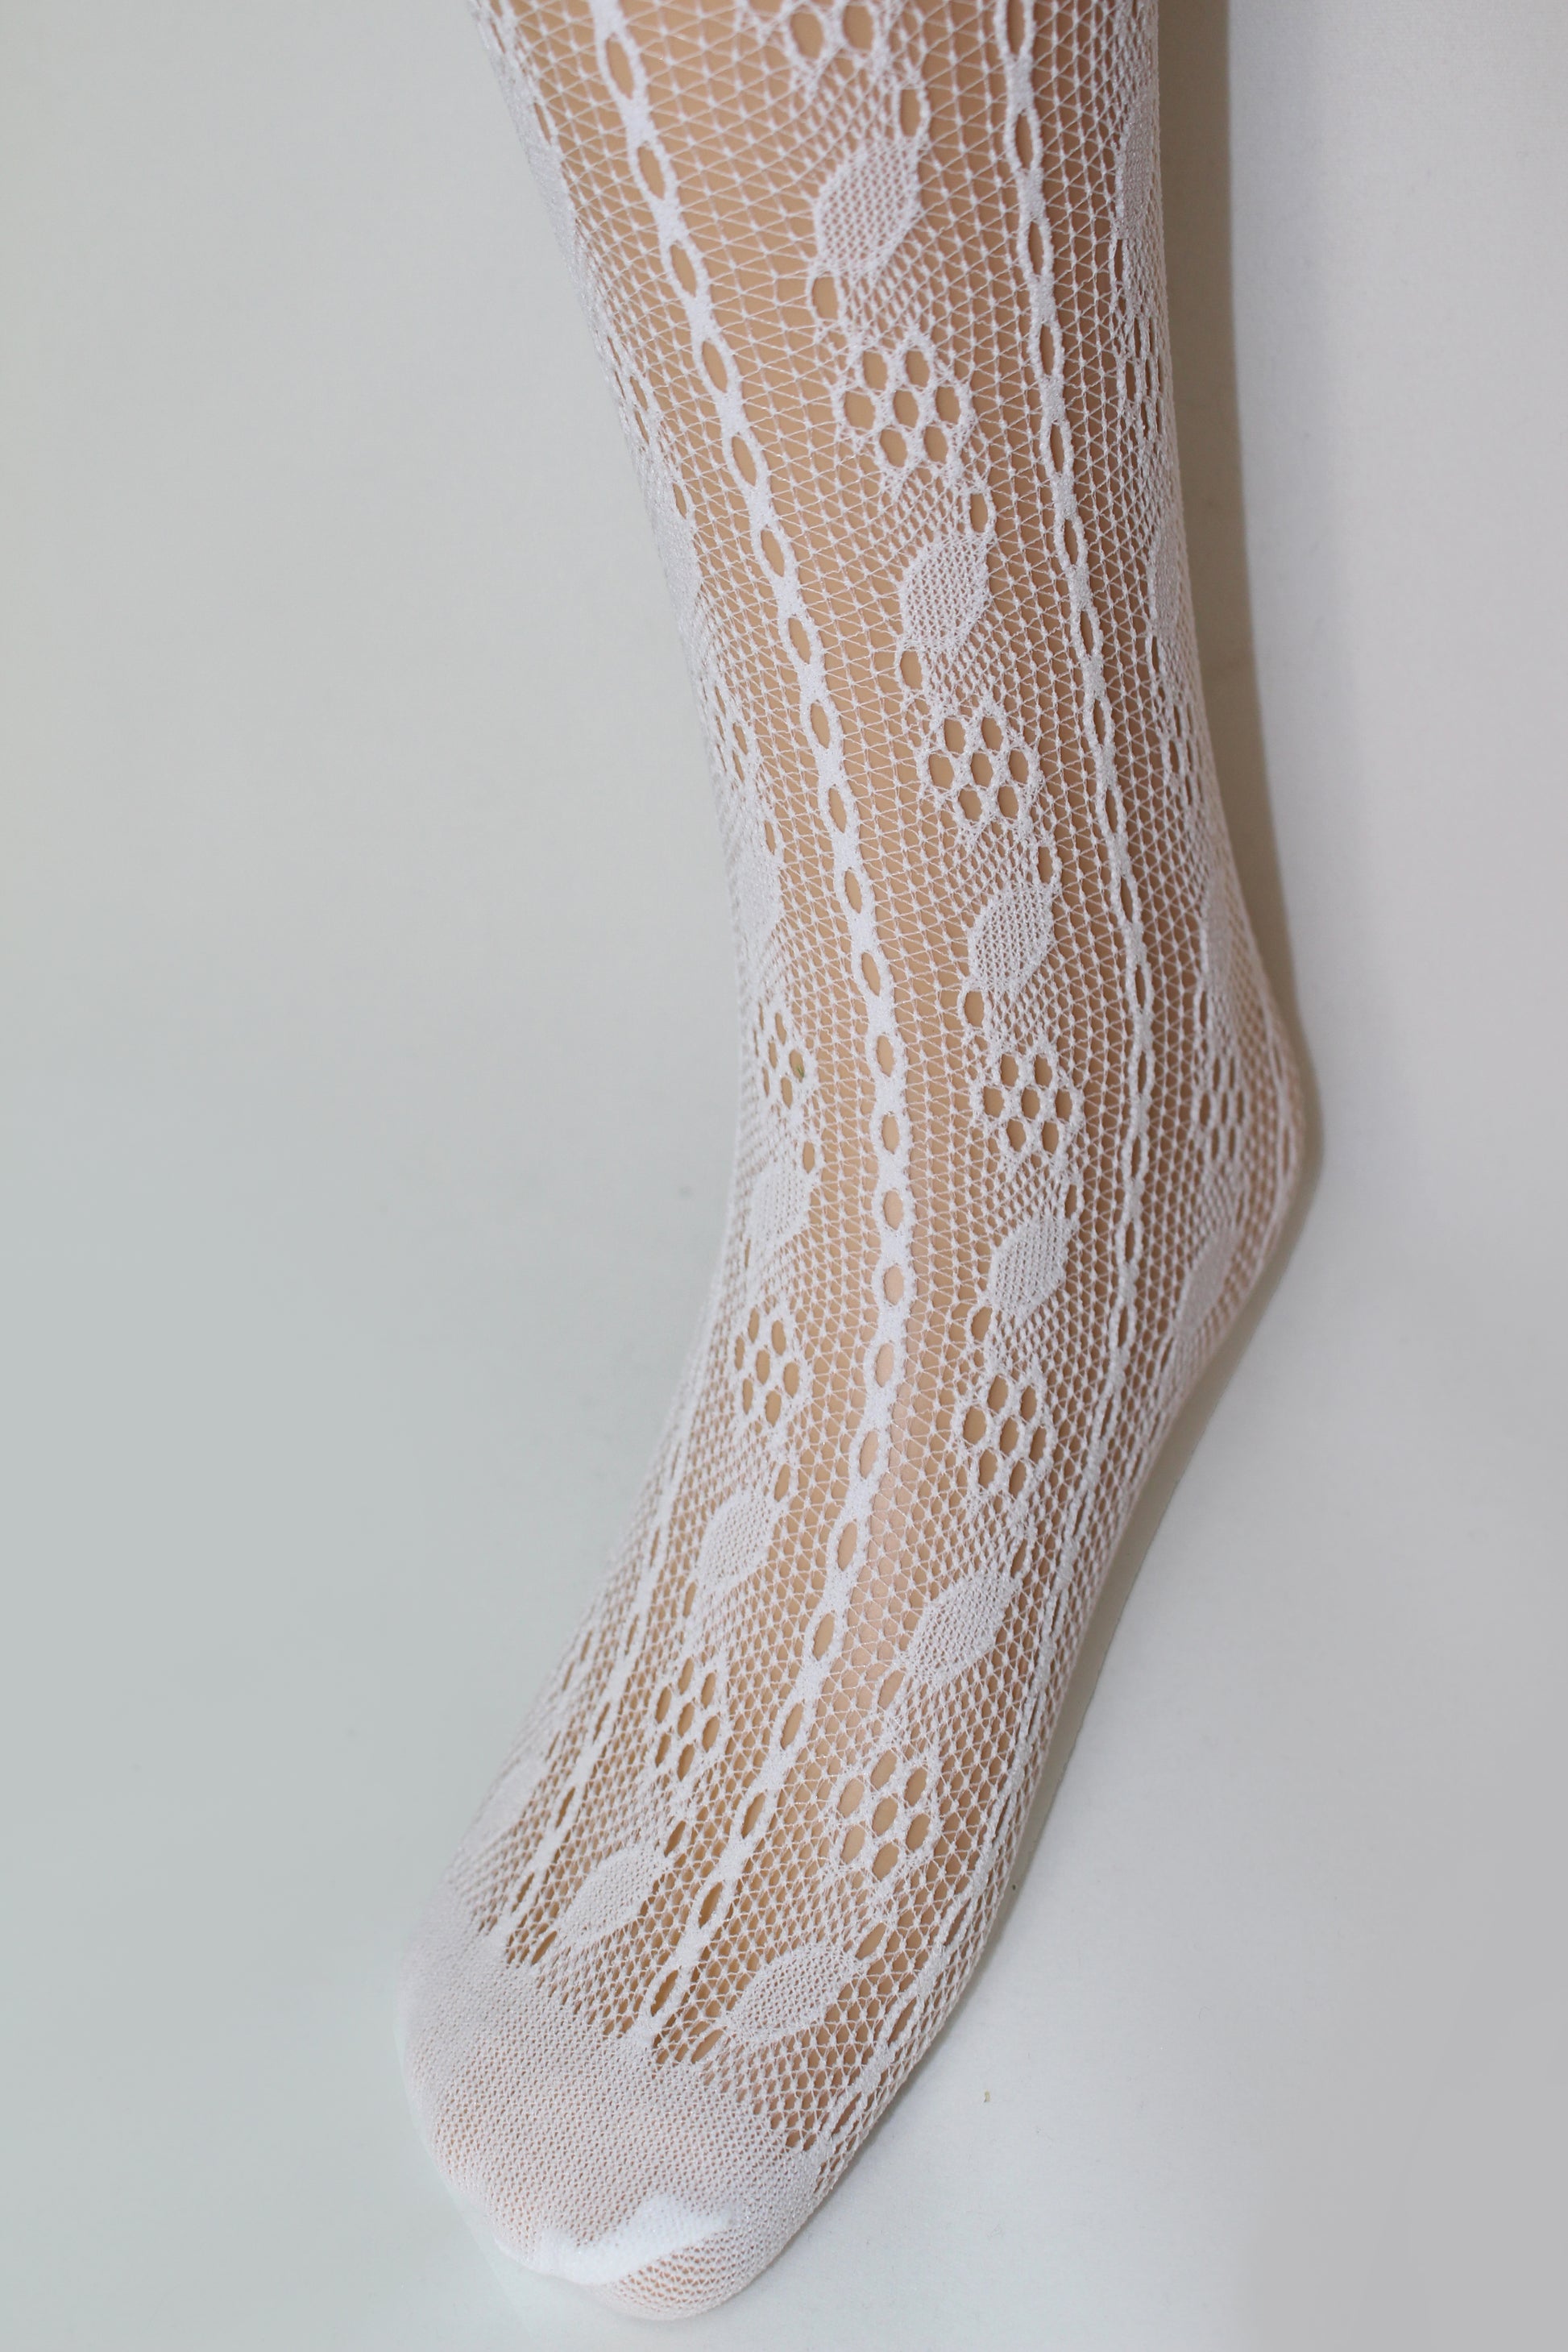 Omsa Souvenir Collant - White openwork crochet floral lace style kid's tights with micro mesh toe and seamless top.